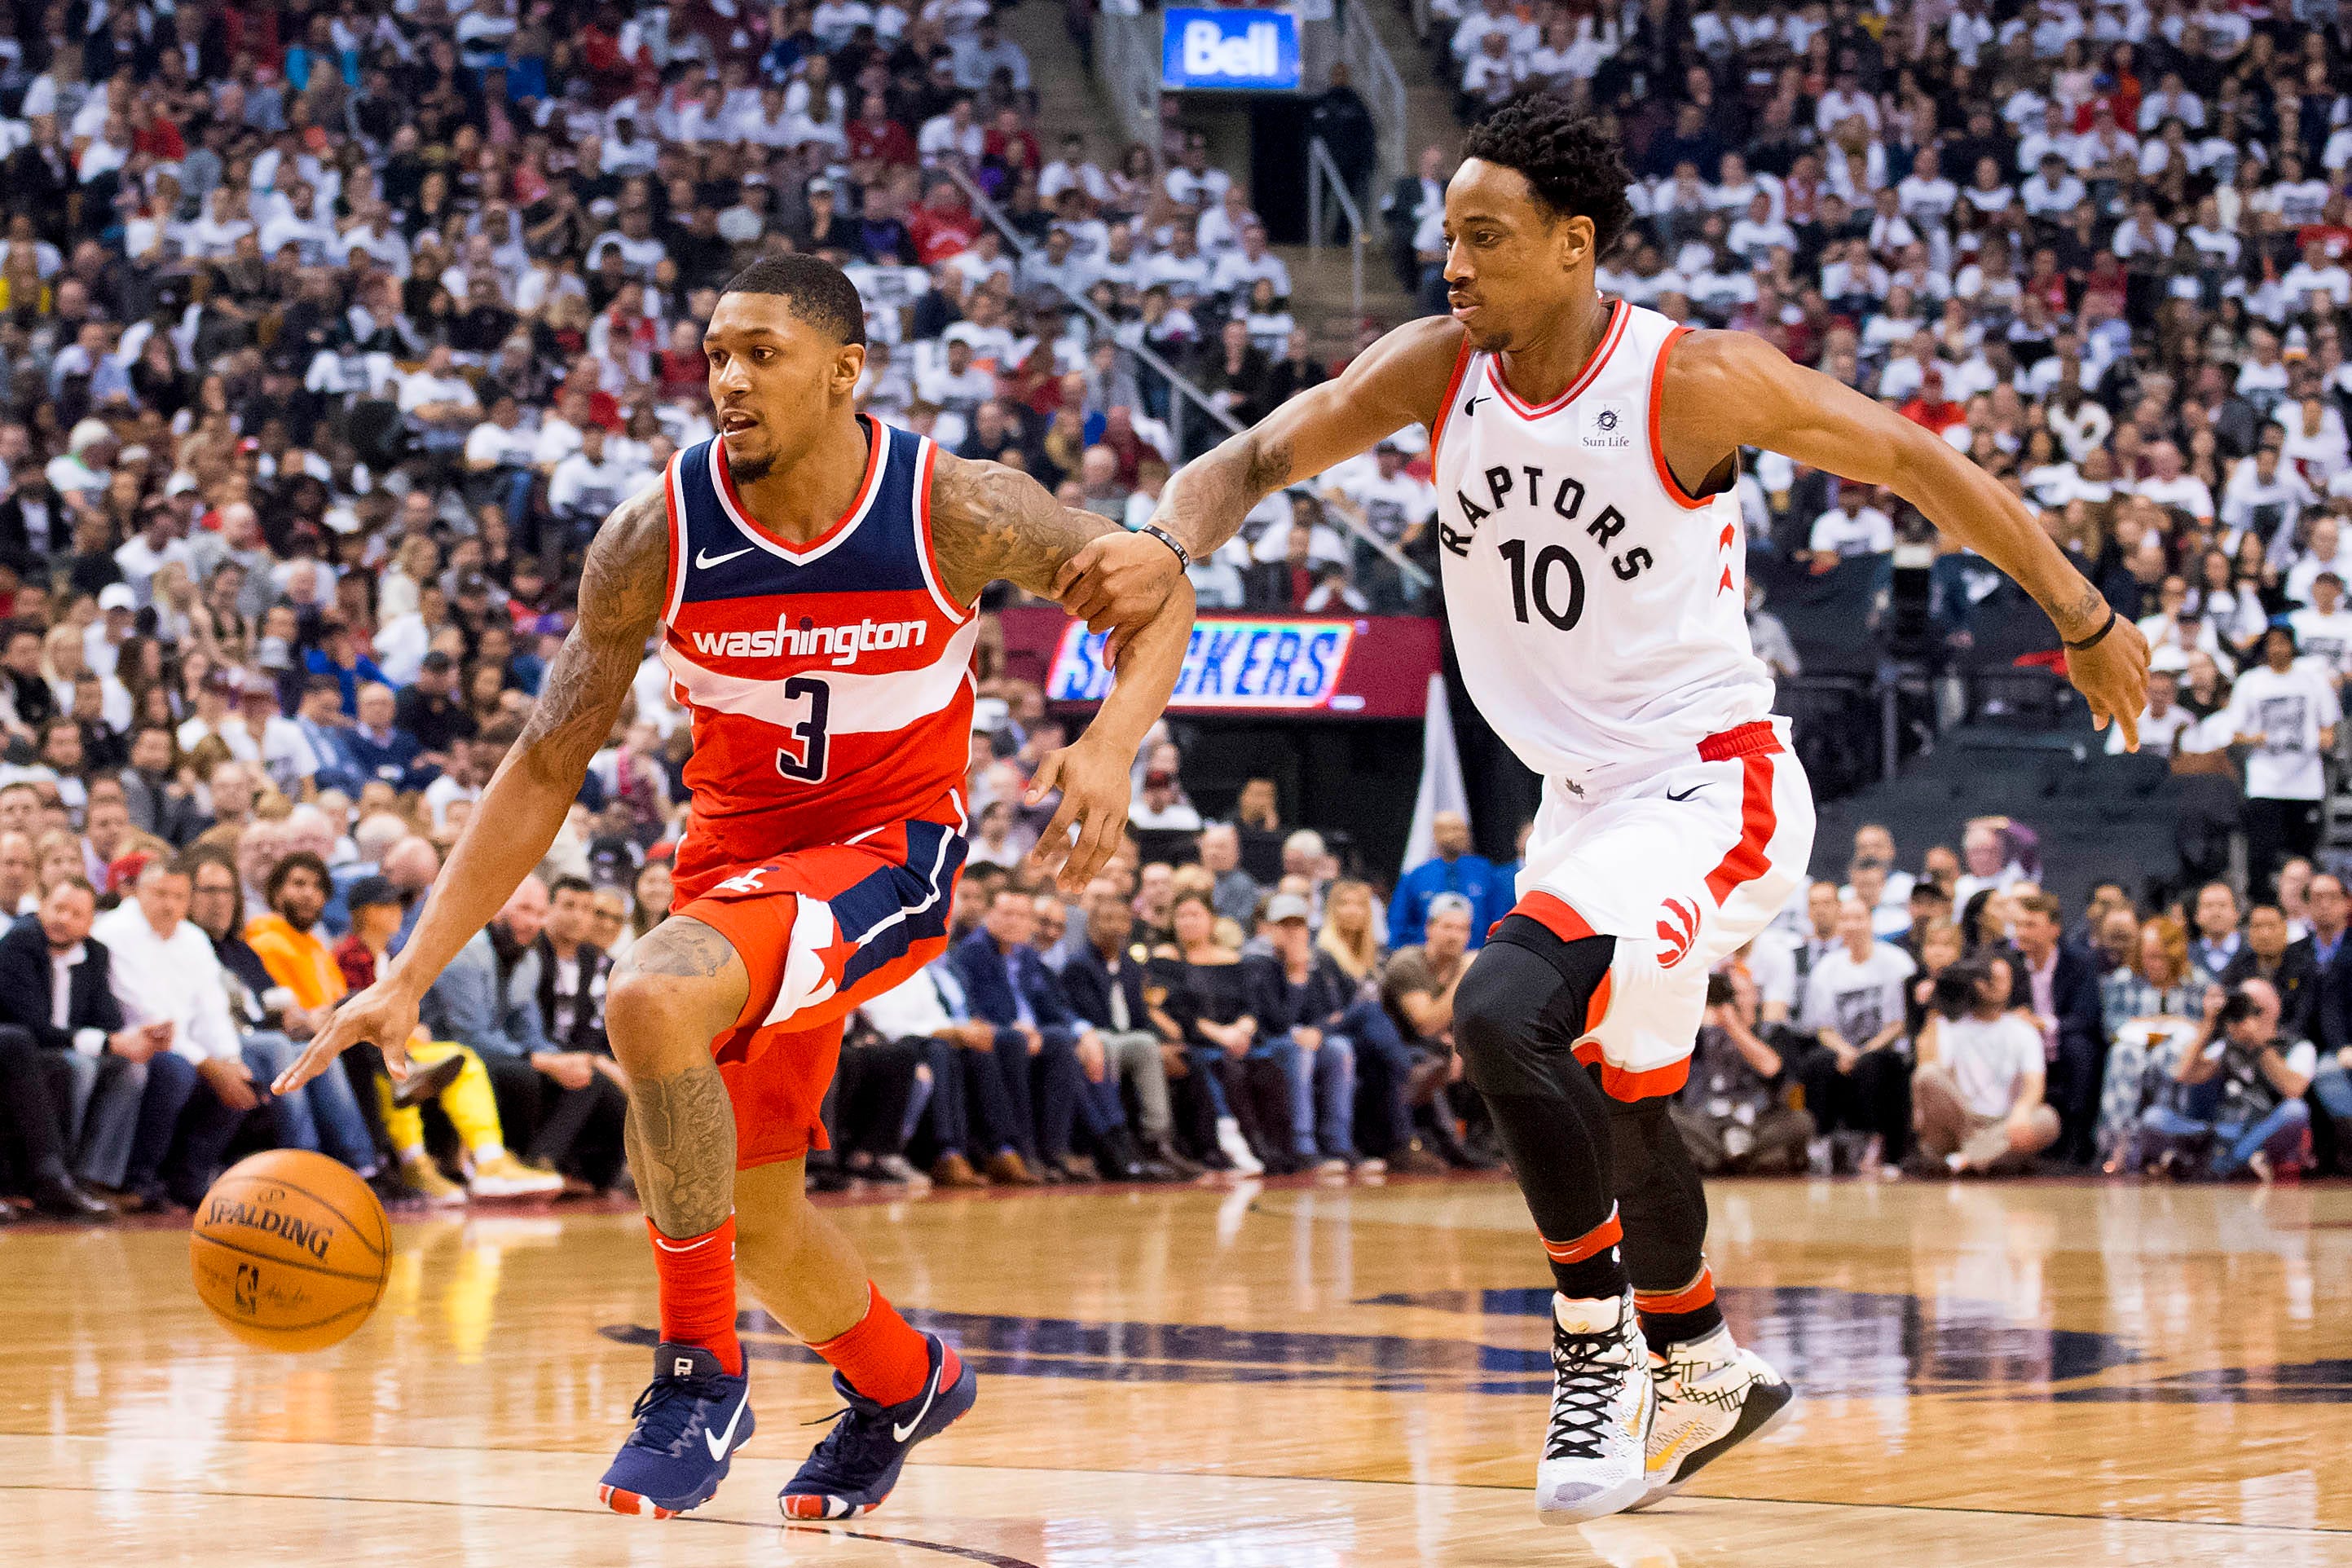 Raptors push Wizards to brink of elimination, take 3-2 series lead